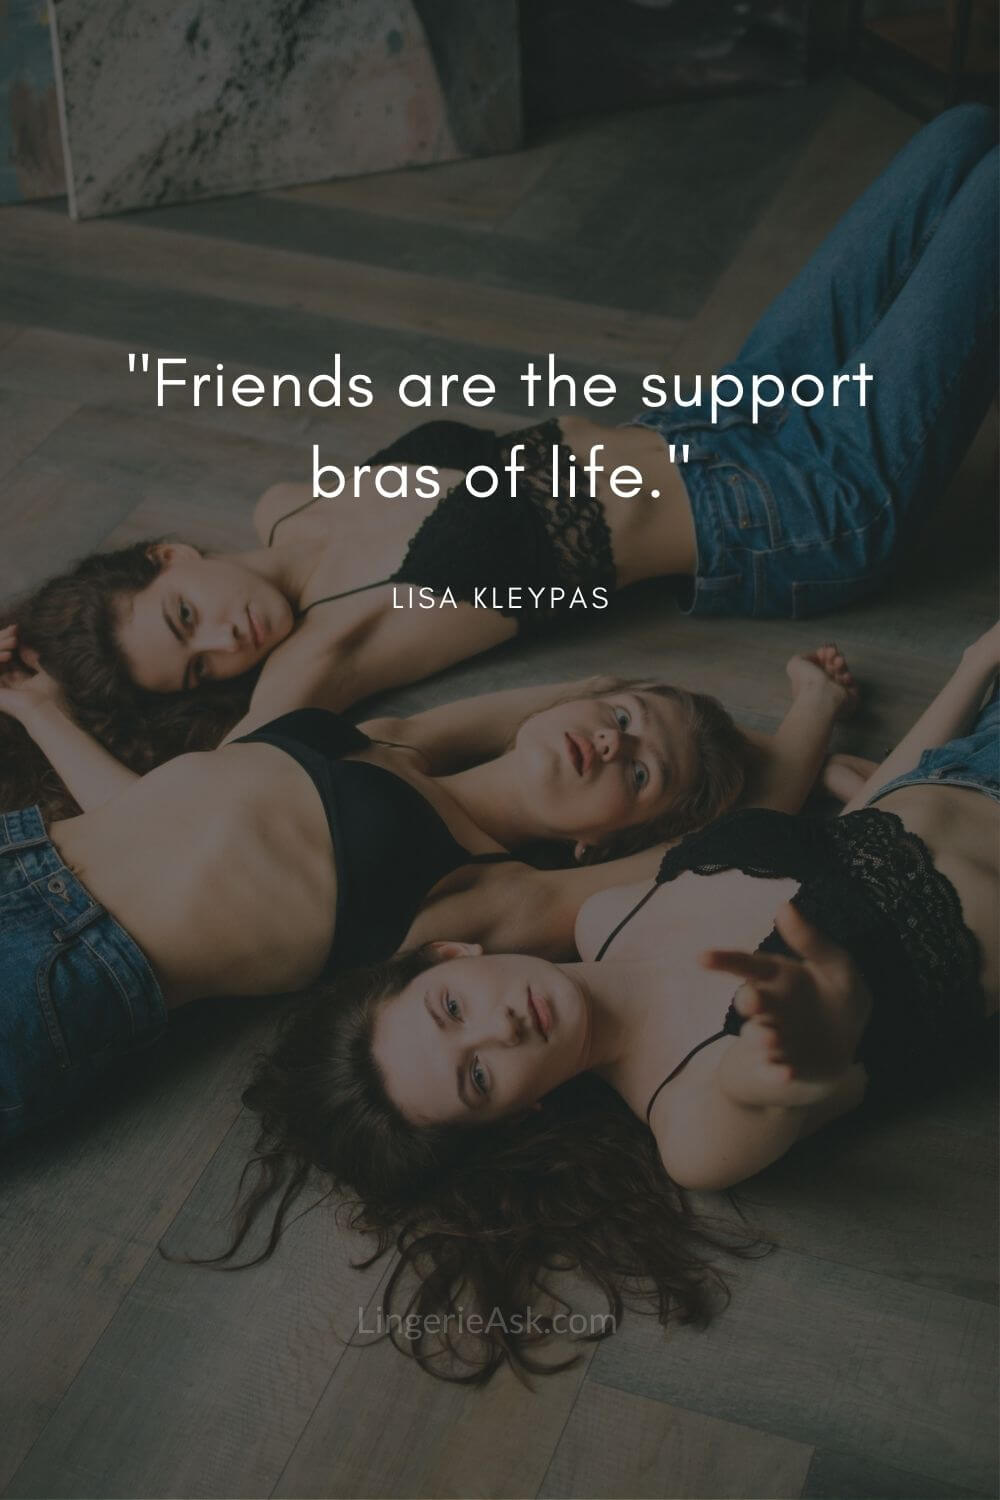 Friends are the support bras of life.